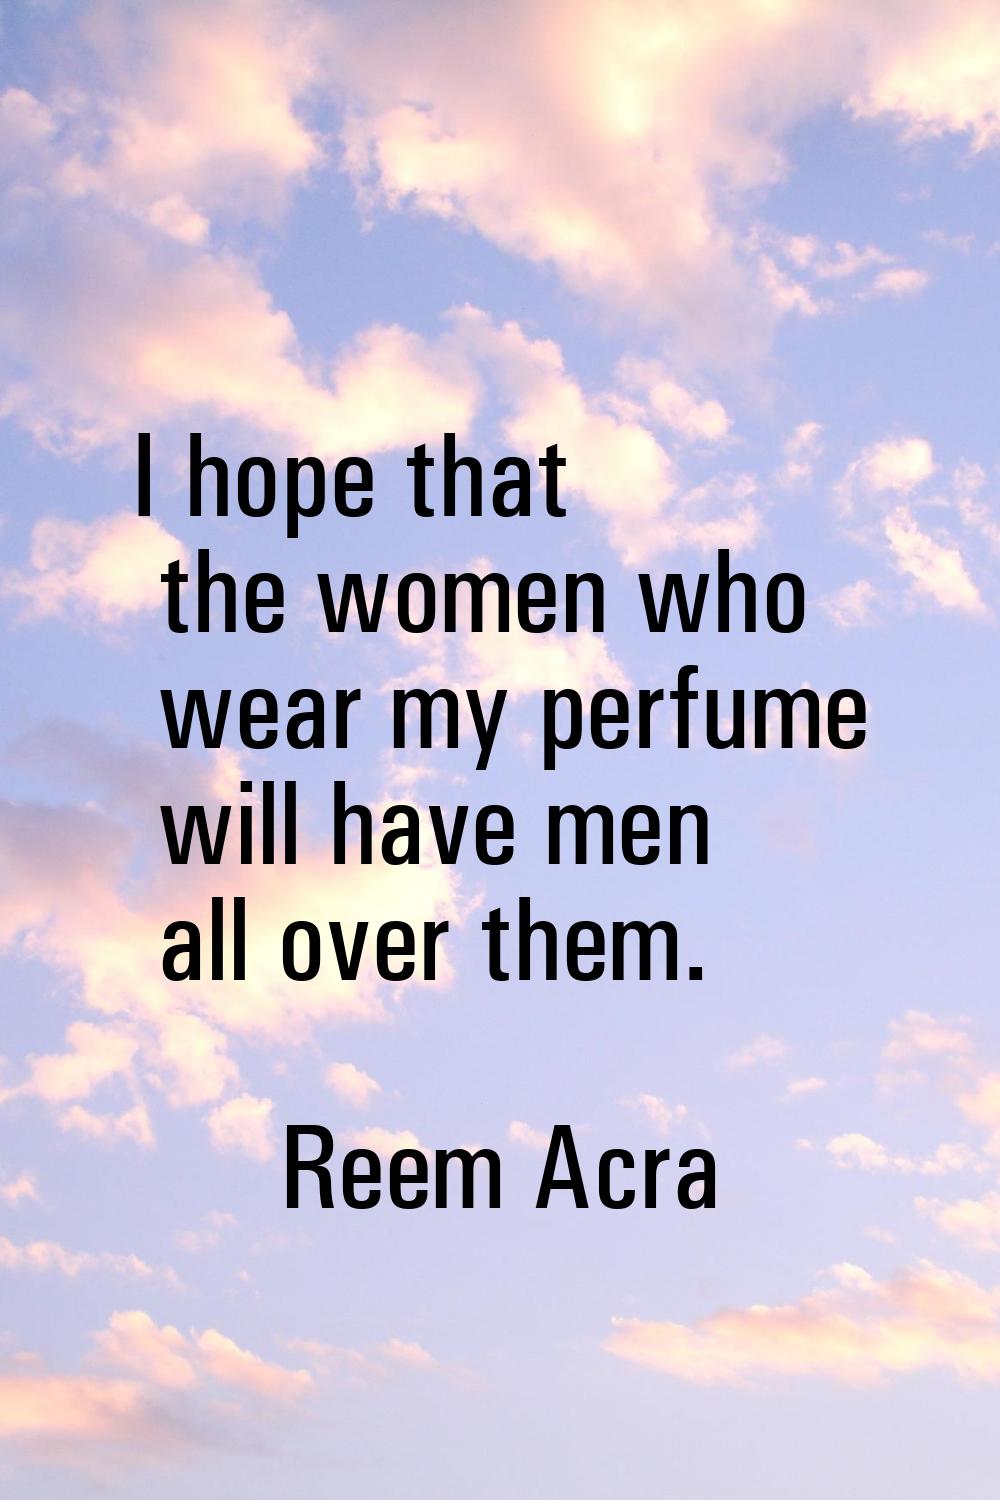 I hope that the women who wear my perfume will have men all over them.